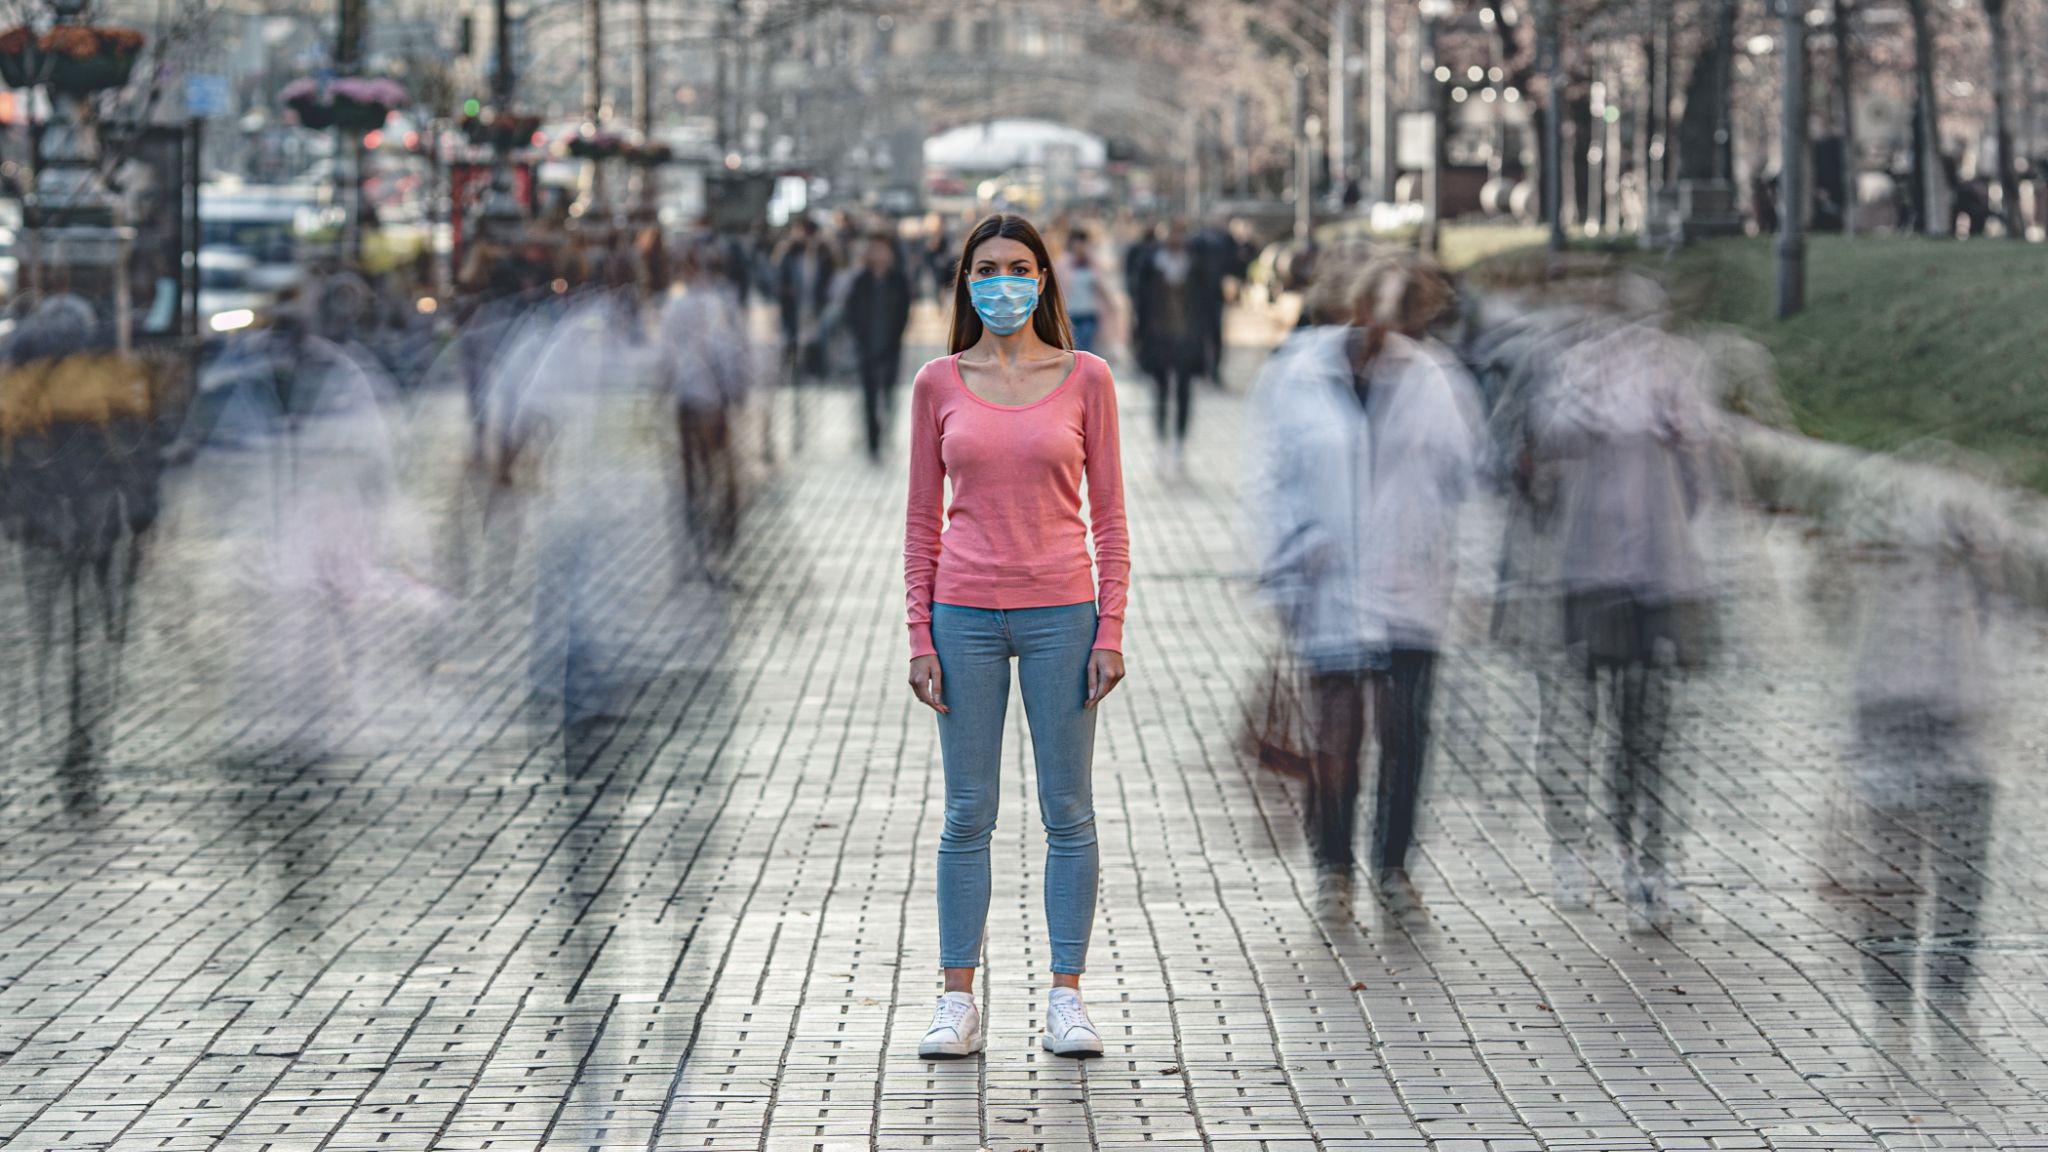 The Woman With Medical Face Mask Stands On The Crowded Street